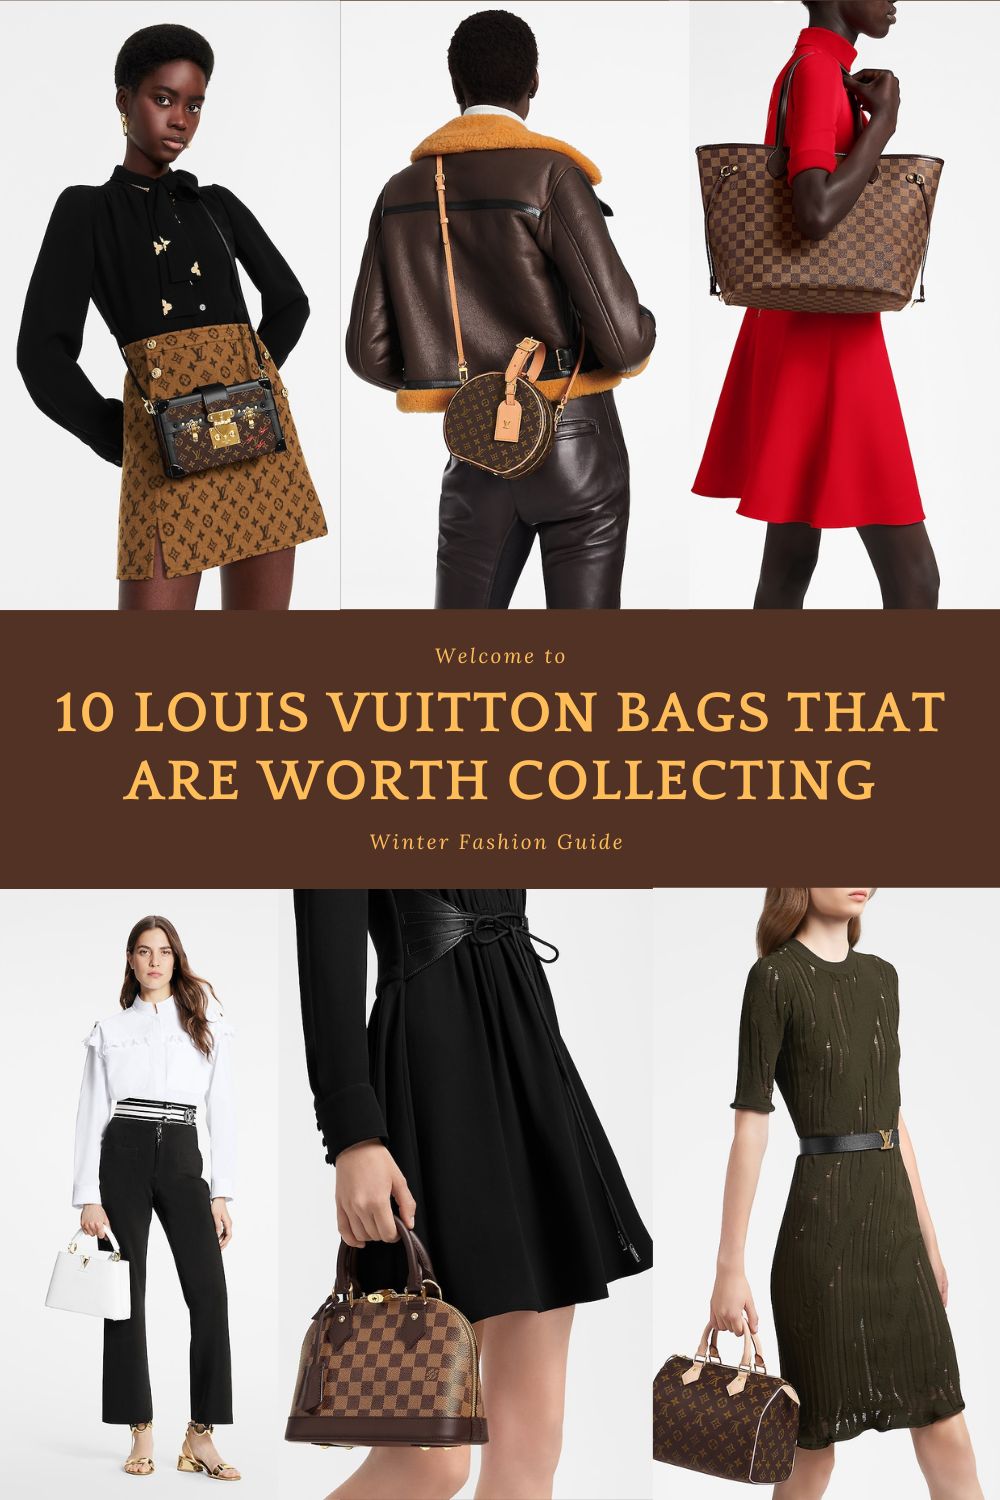 10 Louis Vuitton Bags That Are Worth Collecting